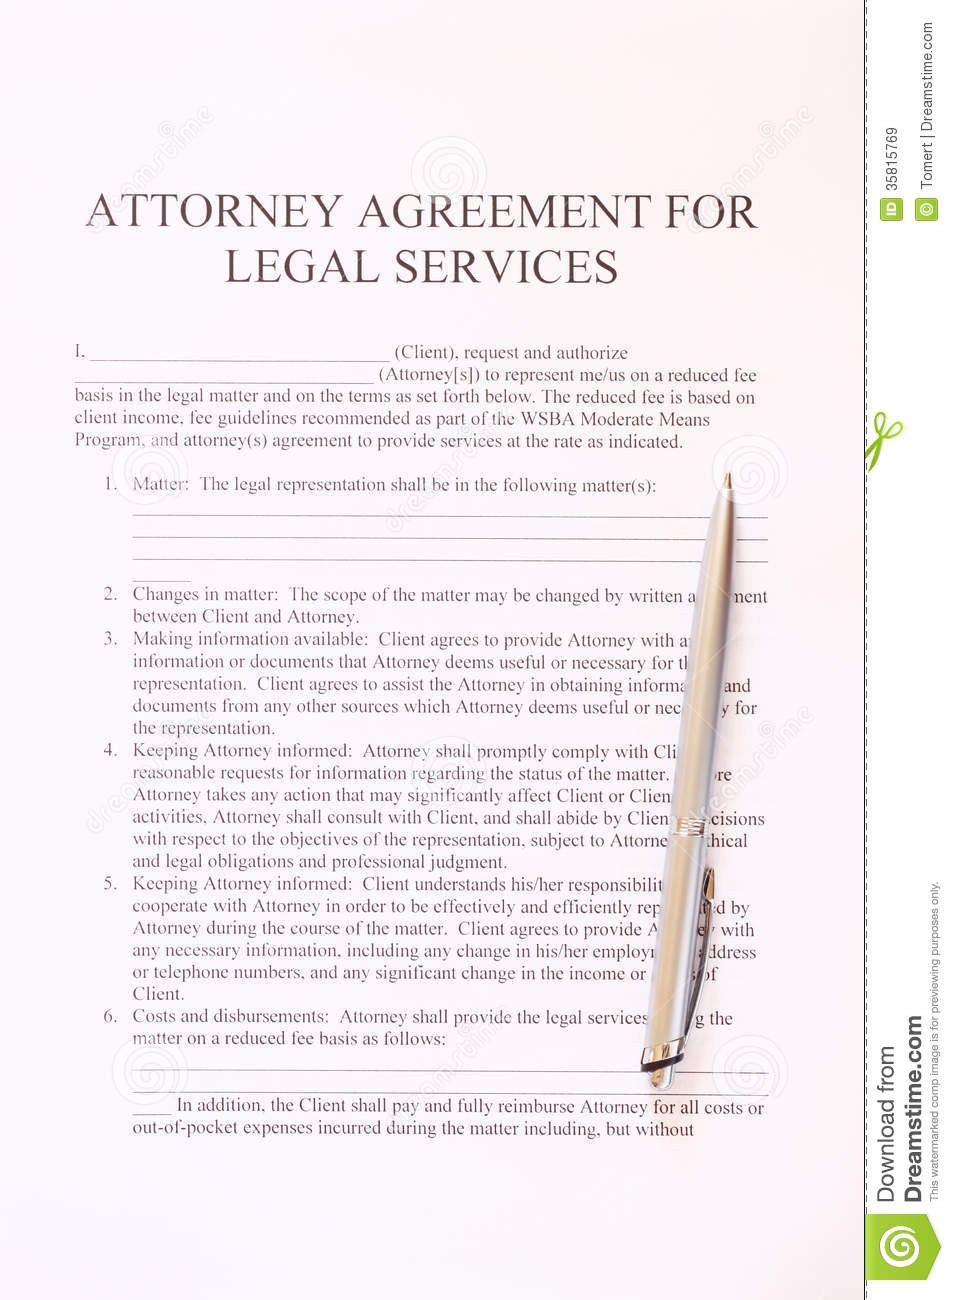 Attorney Agreement For Legal Services Form And Pen Top View Stock Document